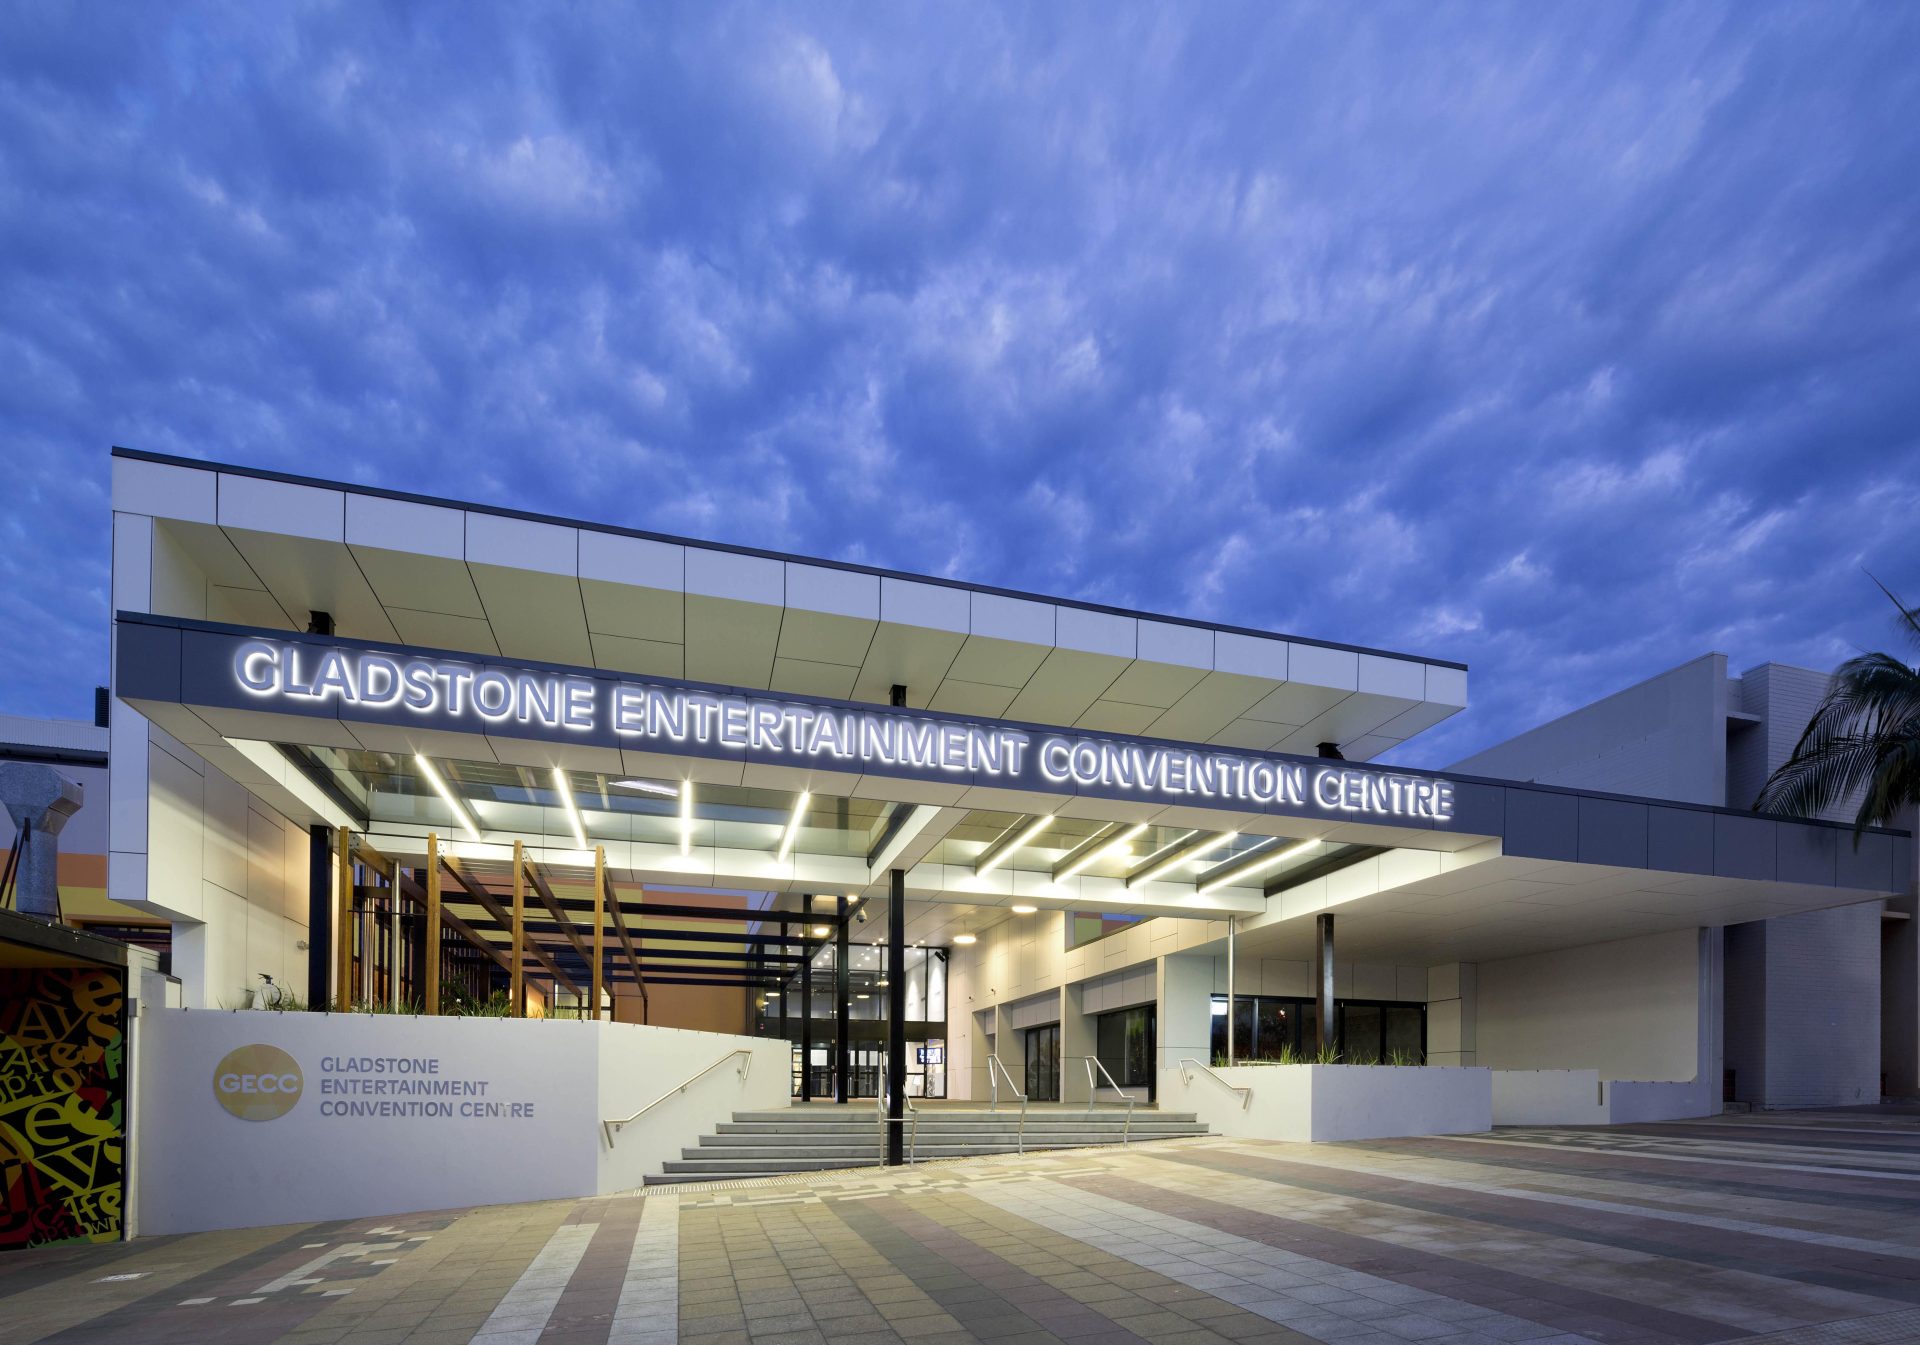 Finishing is the new solution for a new beginning at Gladstone